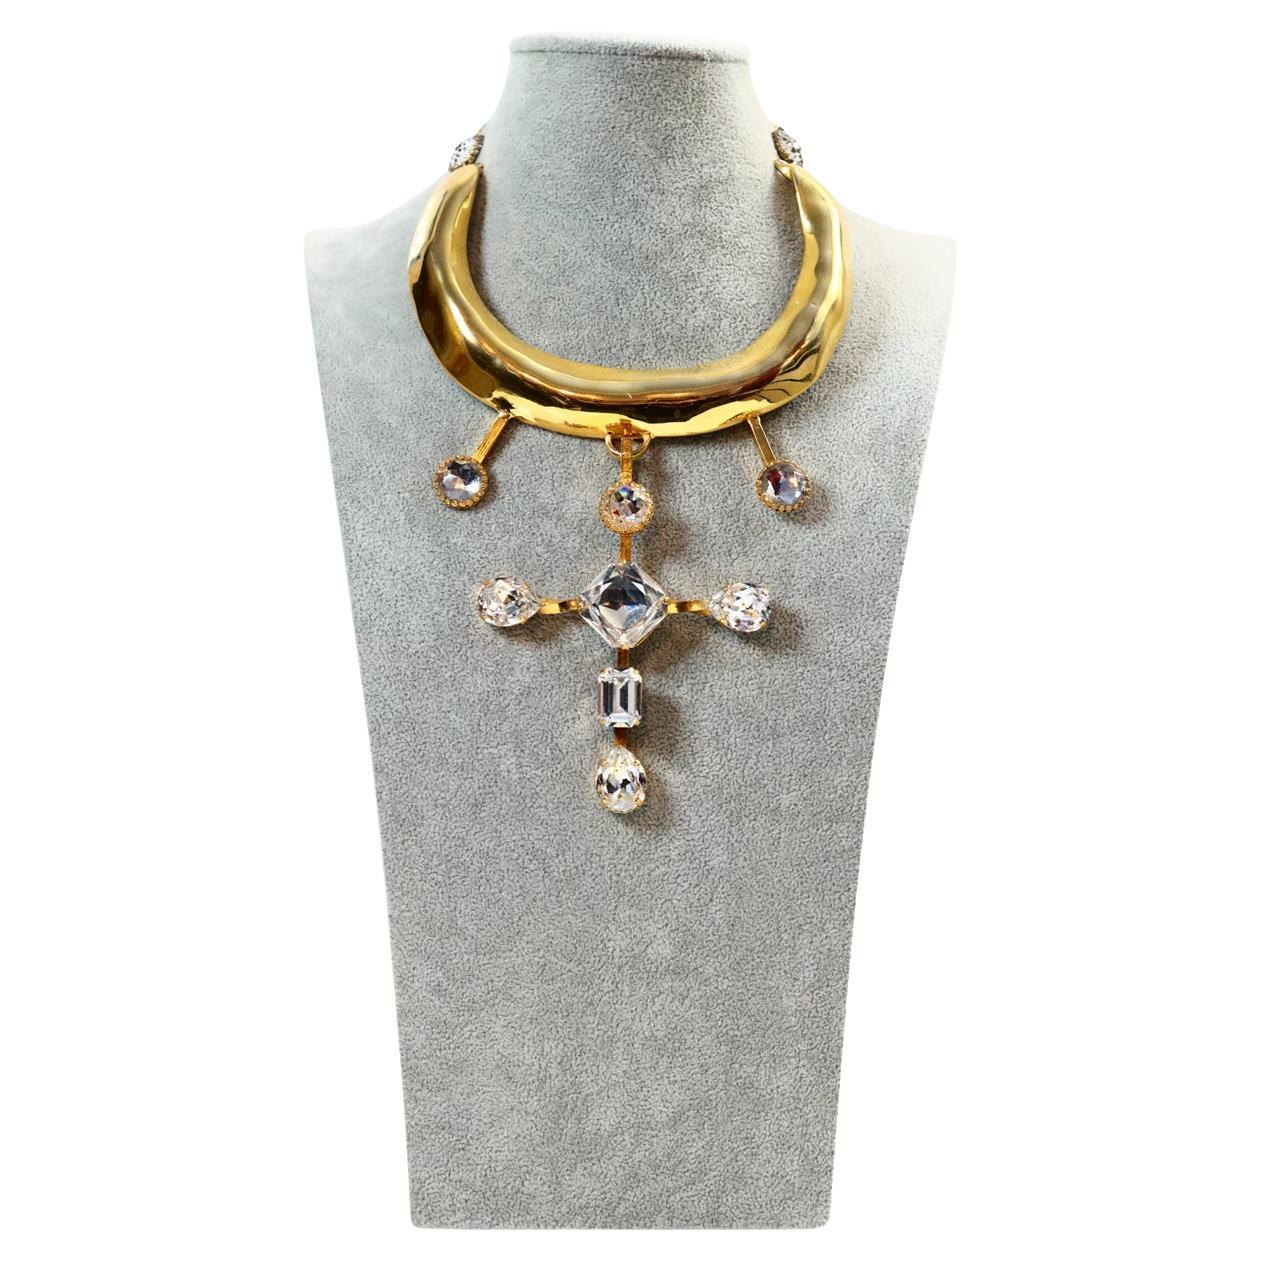 Vintage Christian Lacroix Gold Diamante Long Choker Circa 1990s. This stunning and well made choker with various shapes of crystals is so chic and actually detaches from the gold rigid choker so you could wear it on a black silk cord or another gold